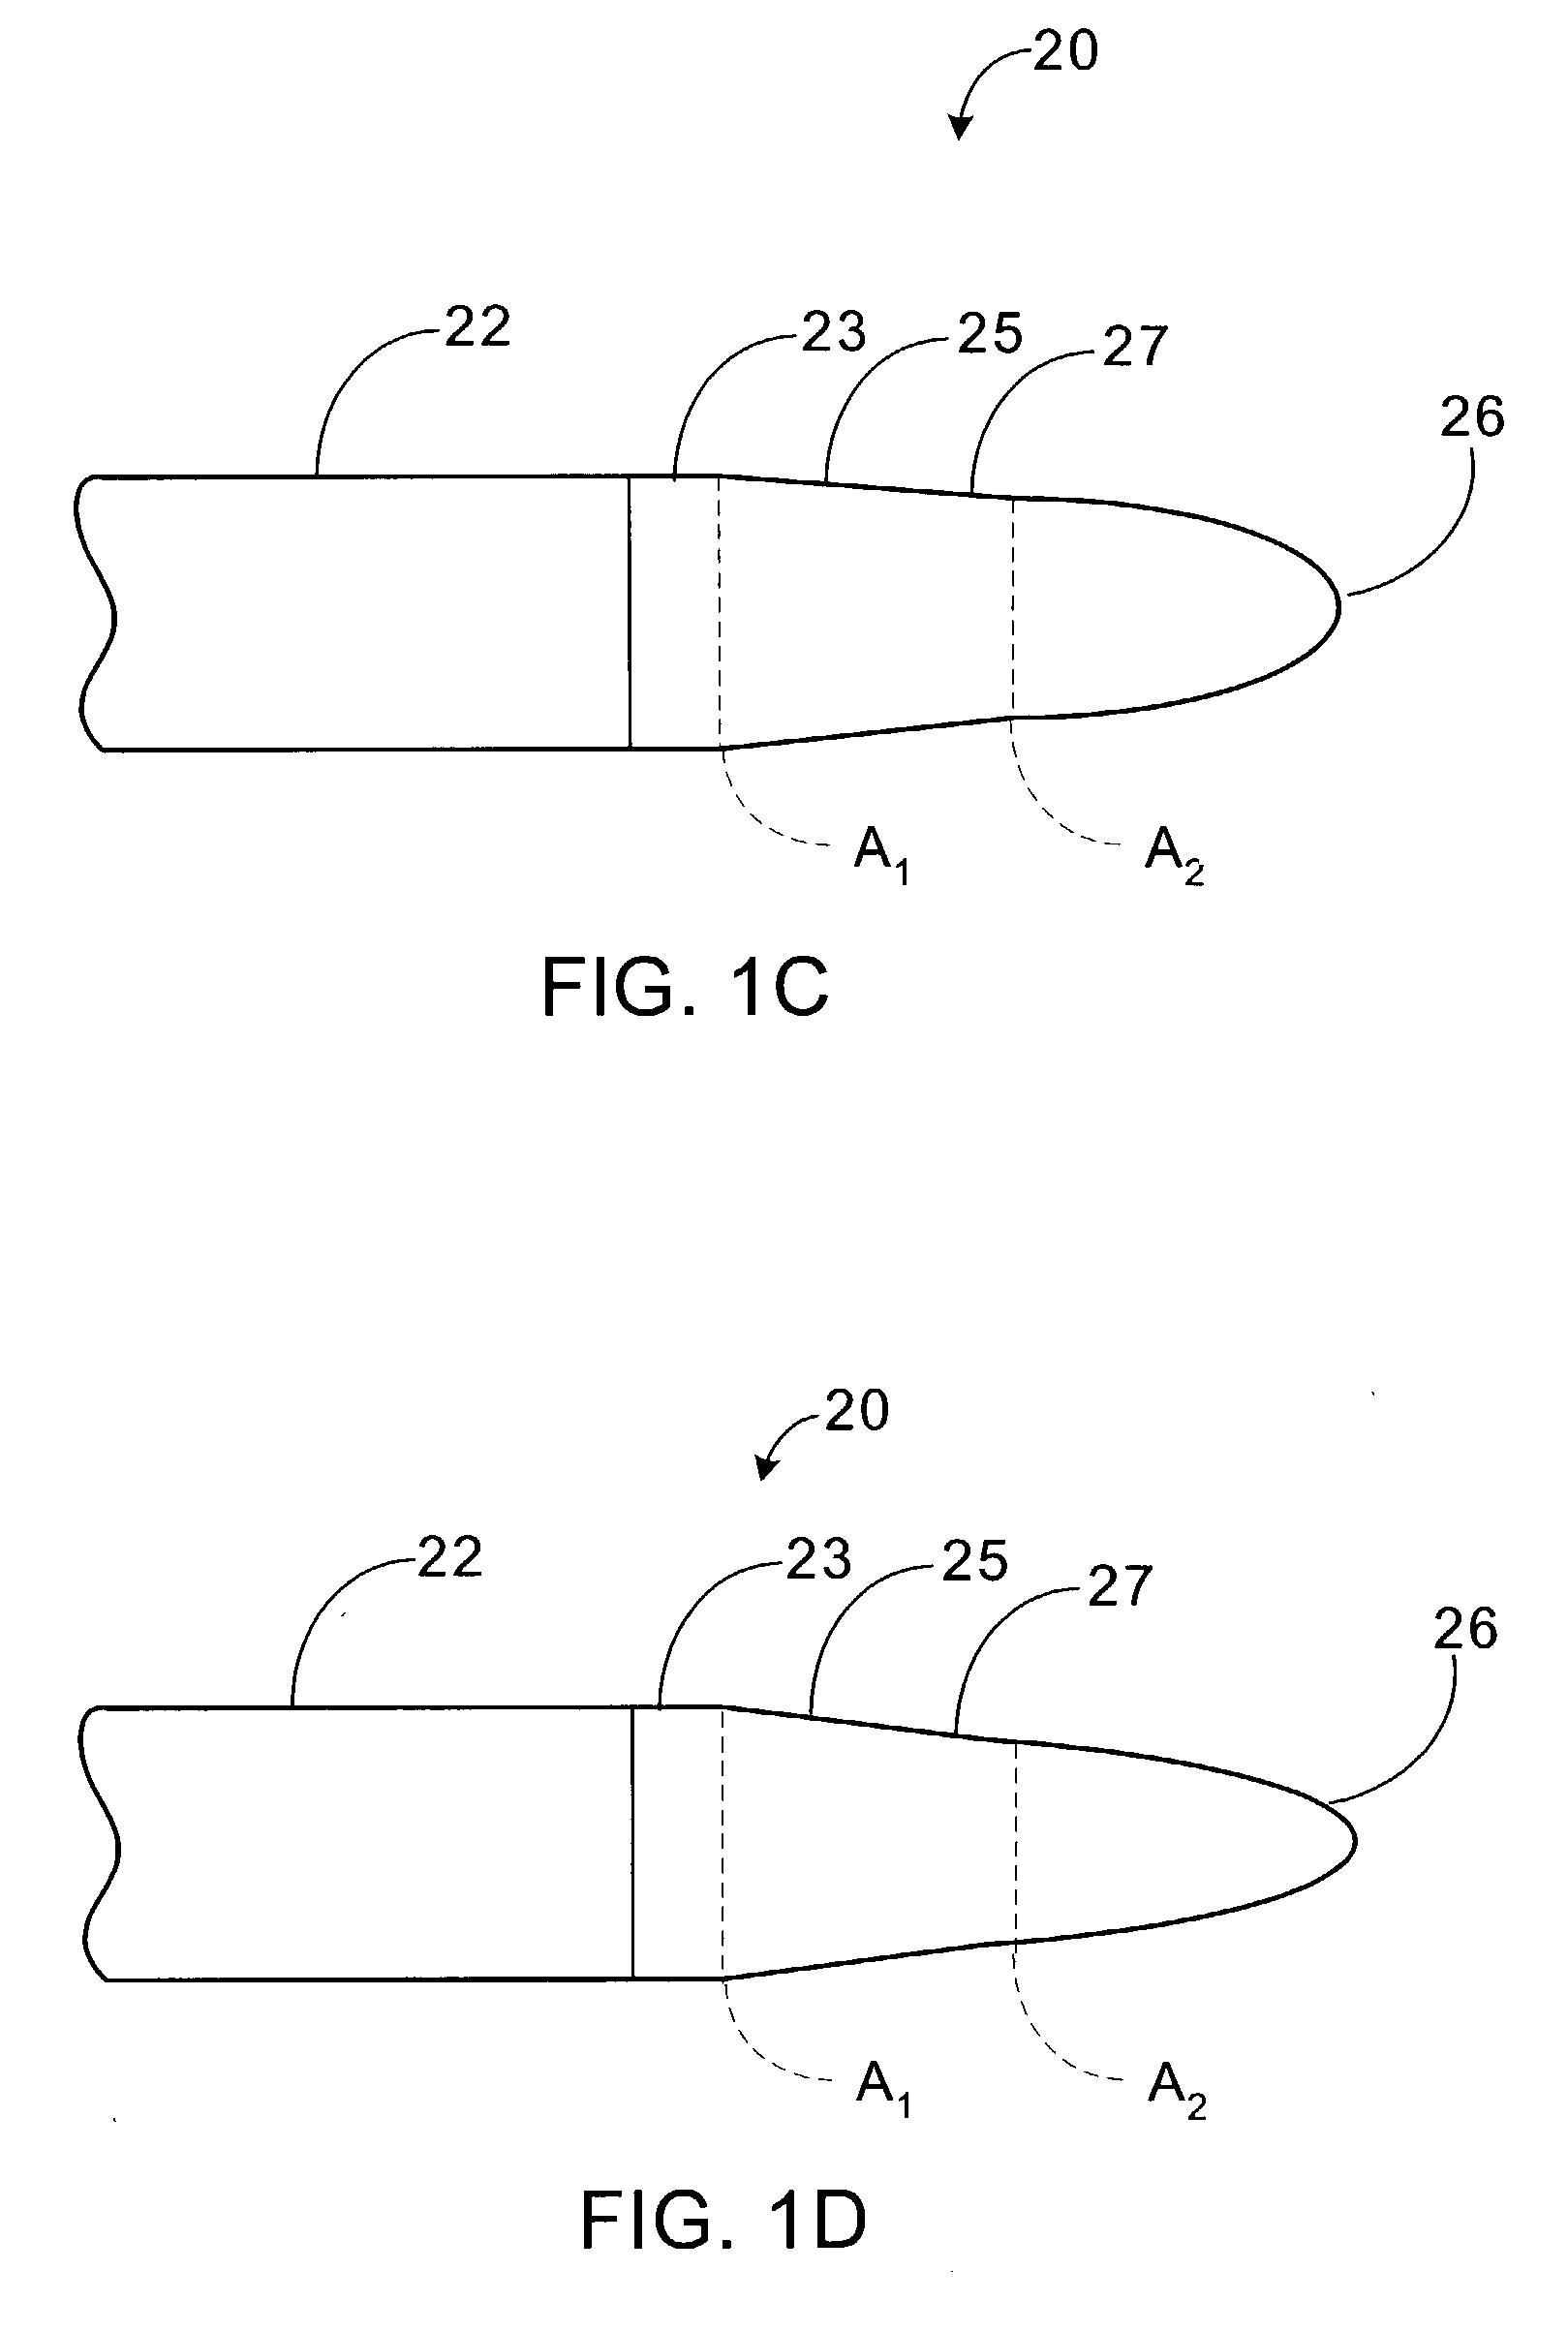 Beam altering fiber lens device and method of manufacture